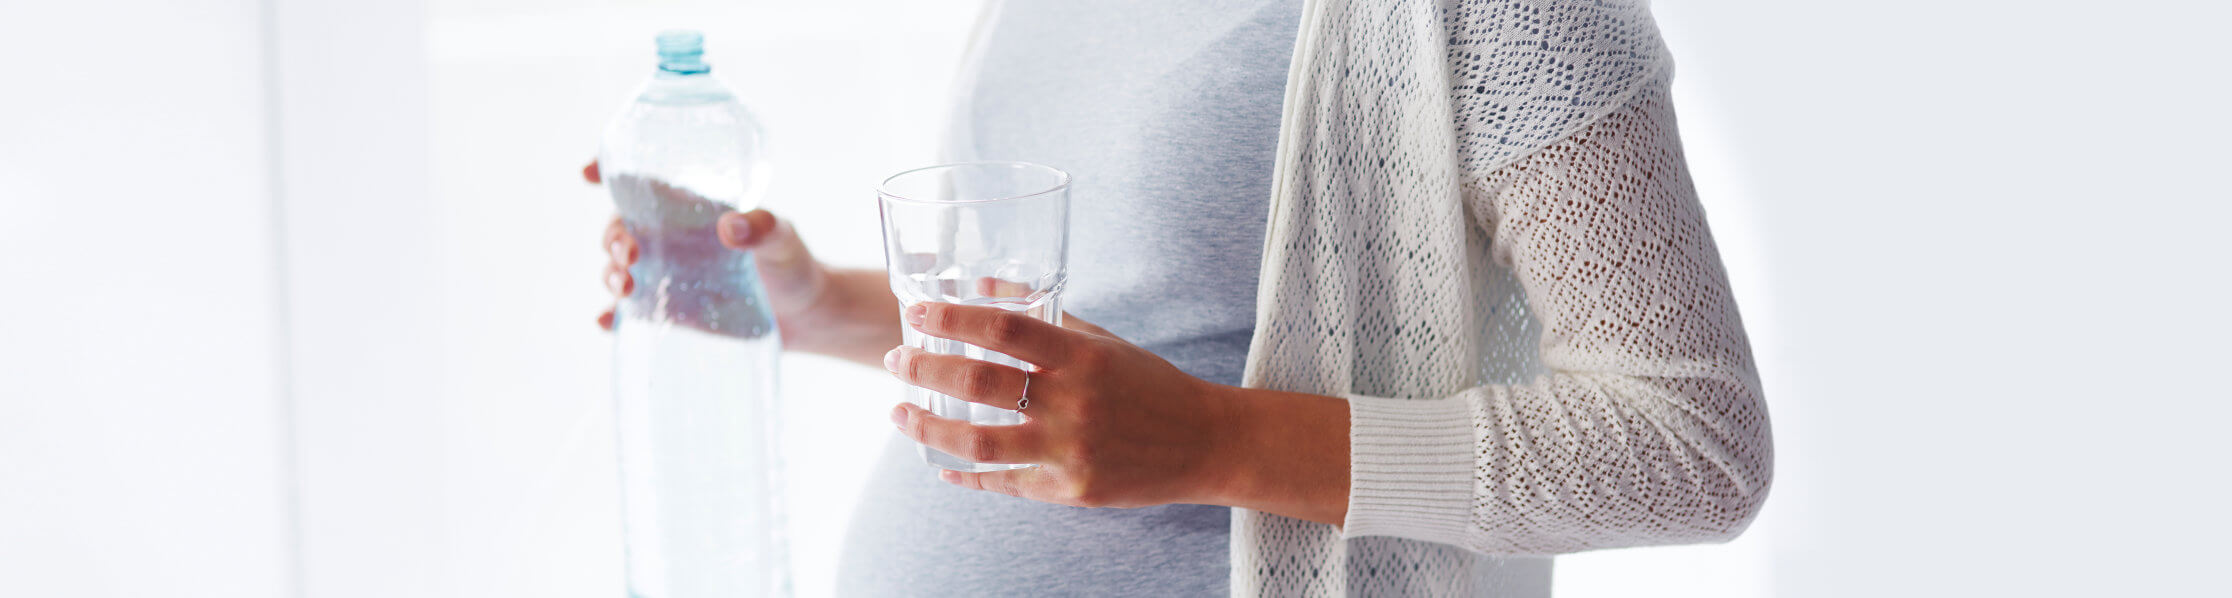 pregnant woman holding a water bottle and water glass